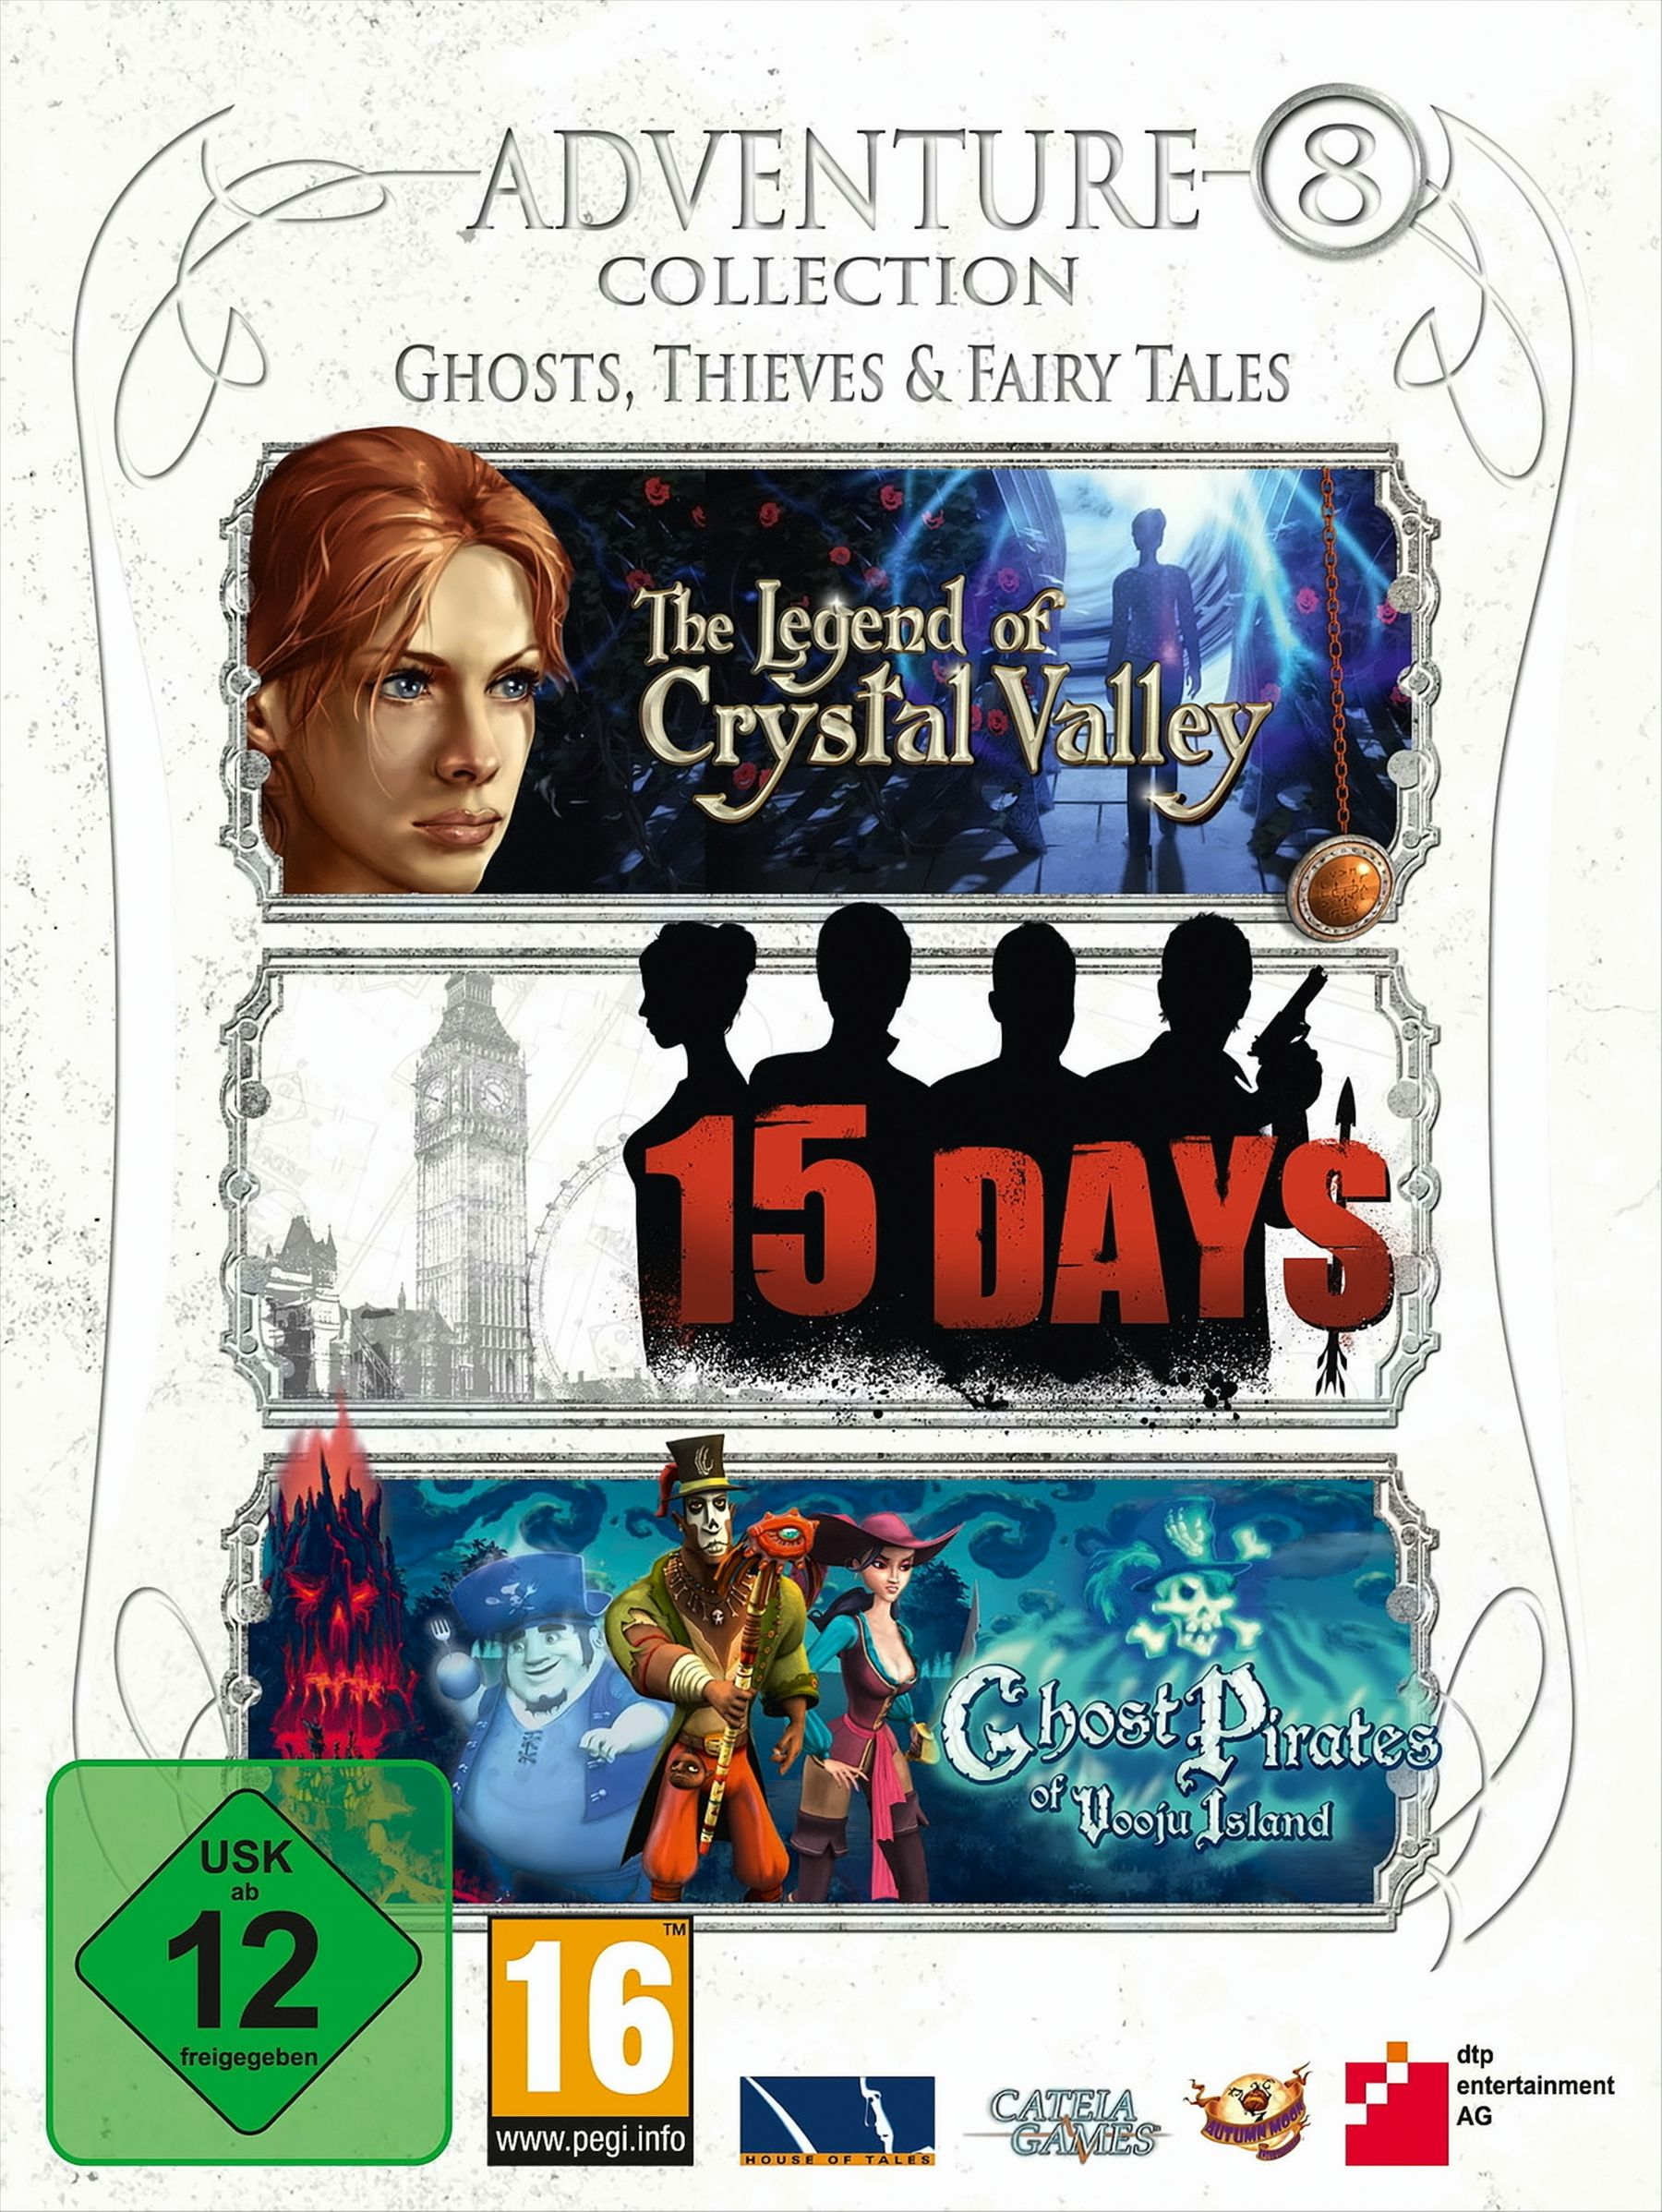 Adventure Collection 8 - Tales & - Fairy Ghosts, Thieves [PC